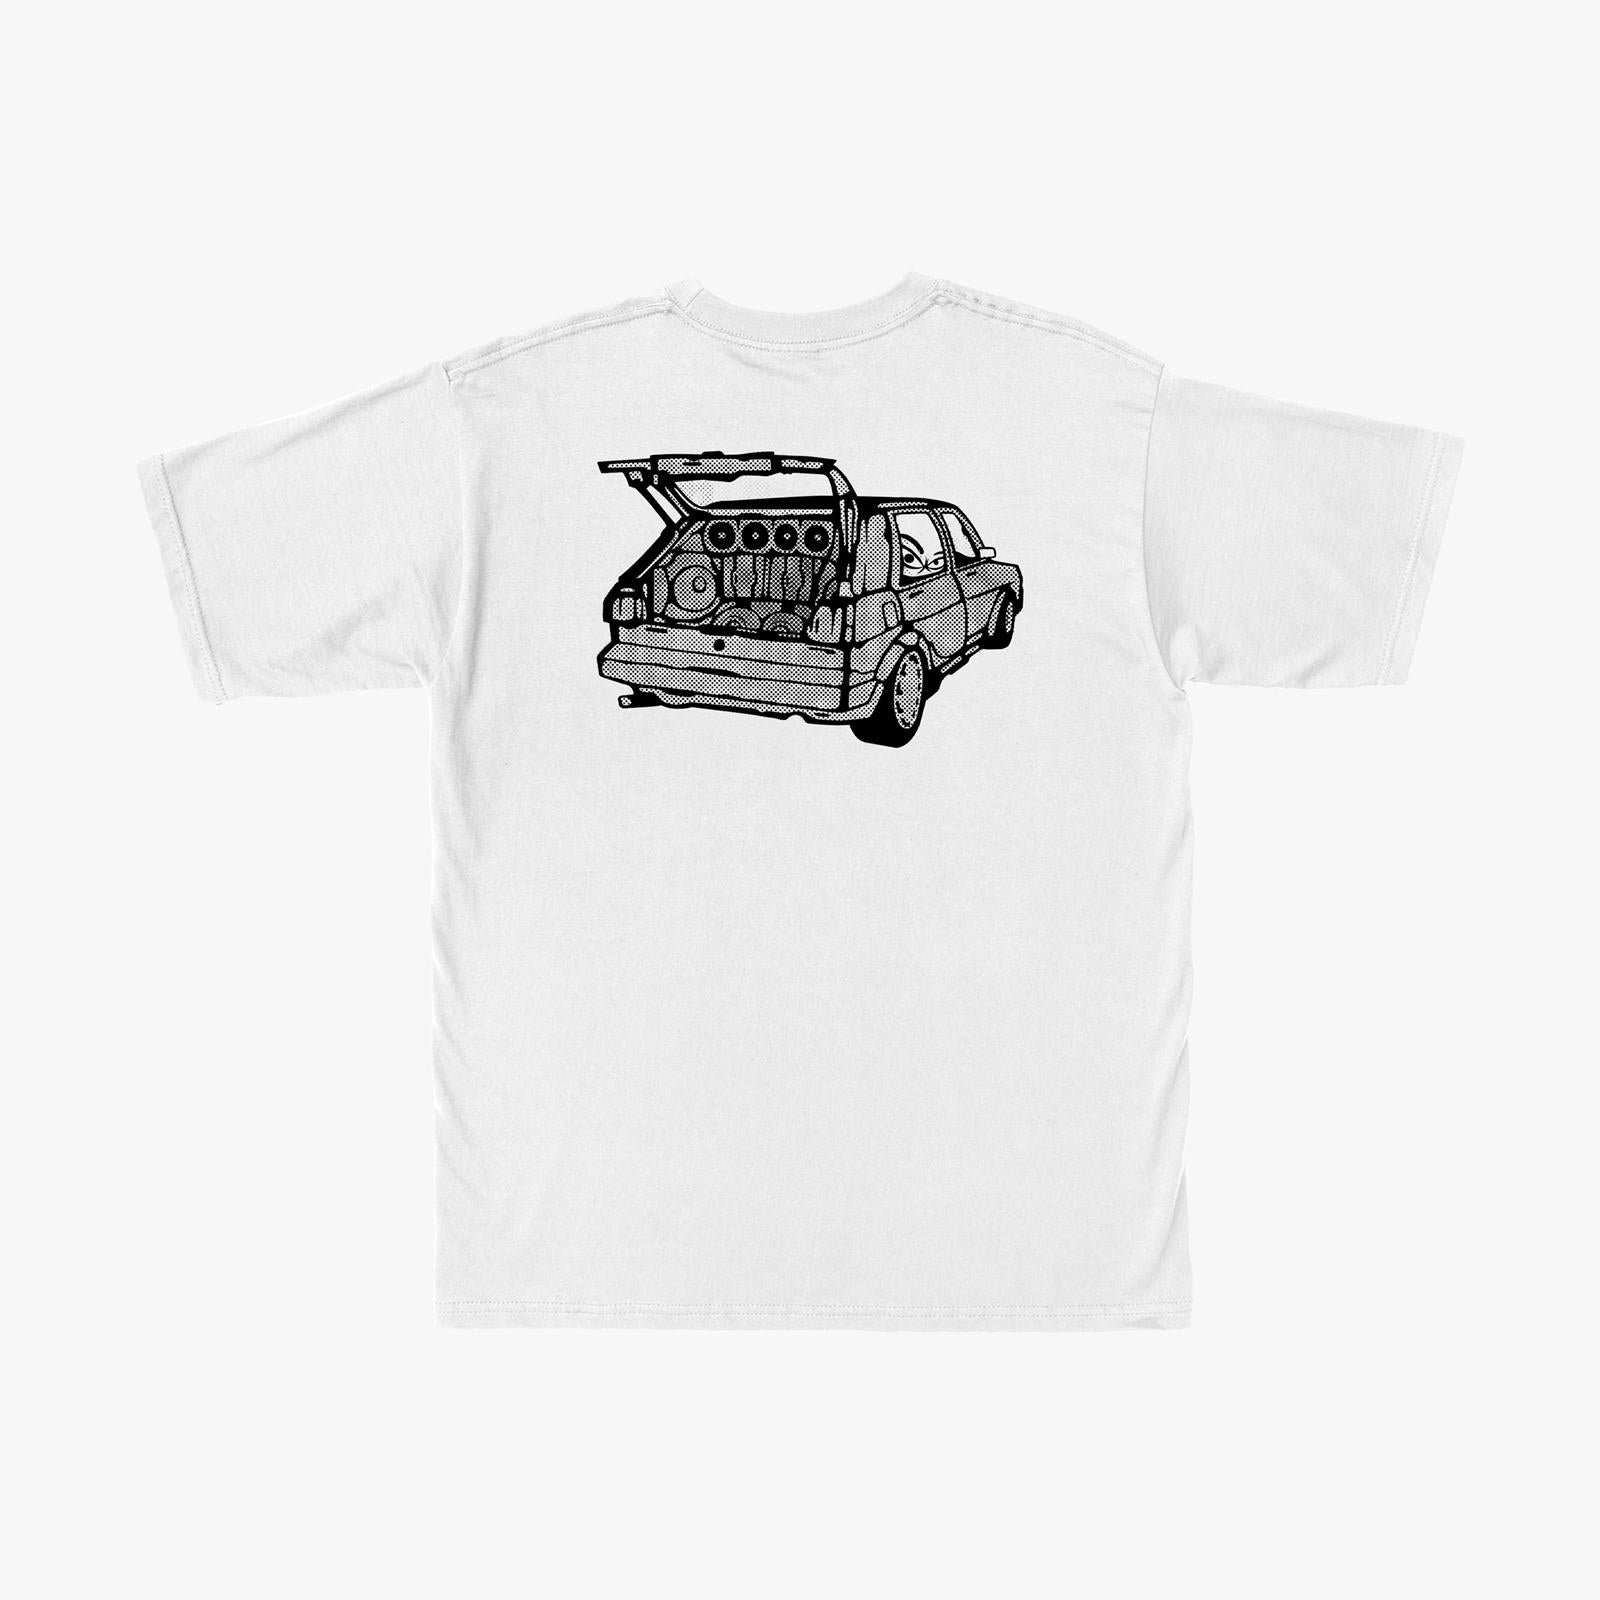 Sekkle x Carboot Club 'Rude Audio' T-shirt